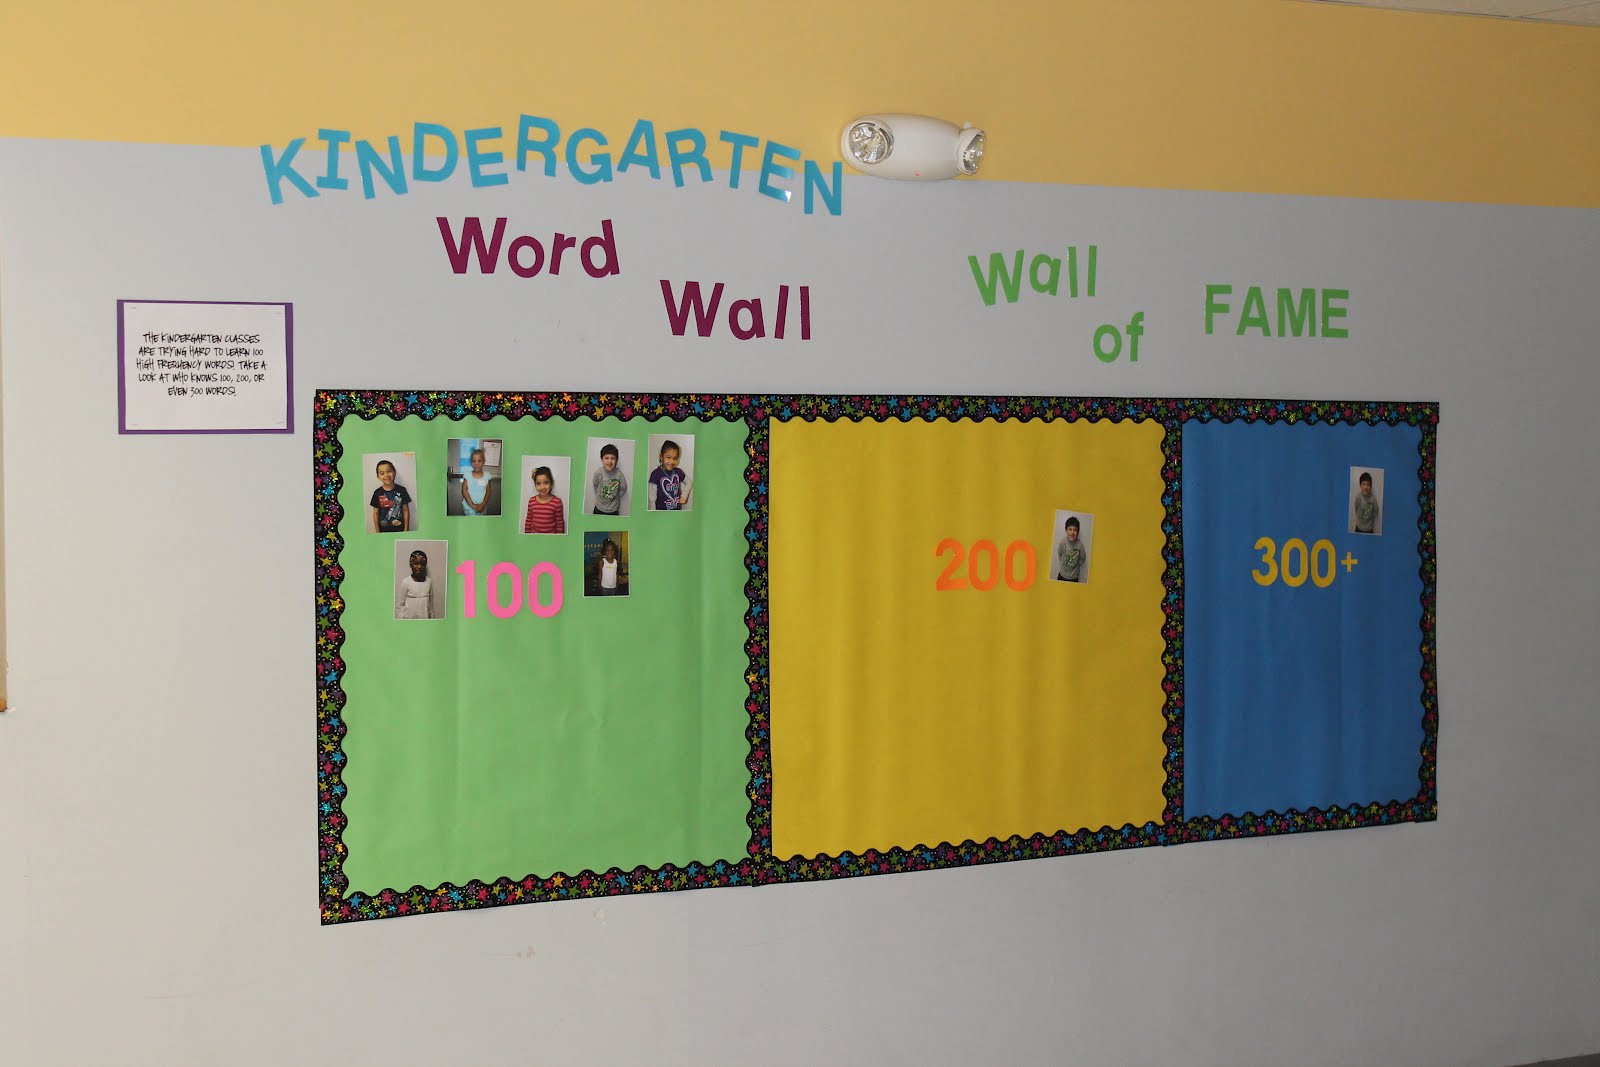 Wordwall films. Word Wall. Wall of Fame. Wordwall 7. Wall of Fame in English class.